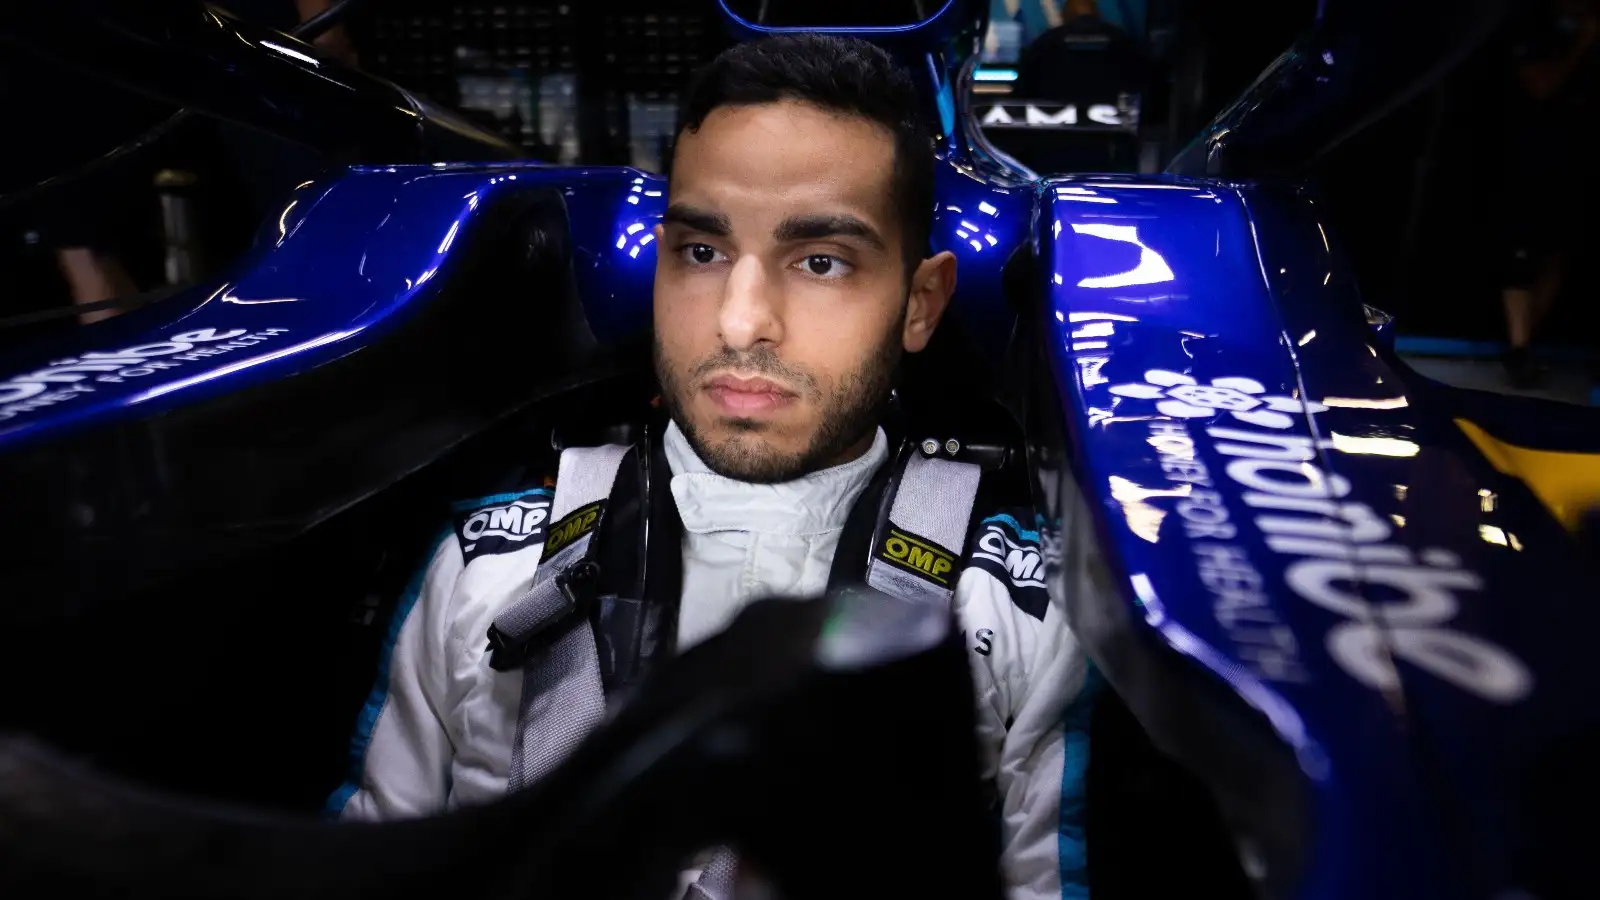 Roy Nissany sits in the Williams cockpit. Austria, July 2021.